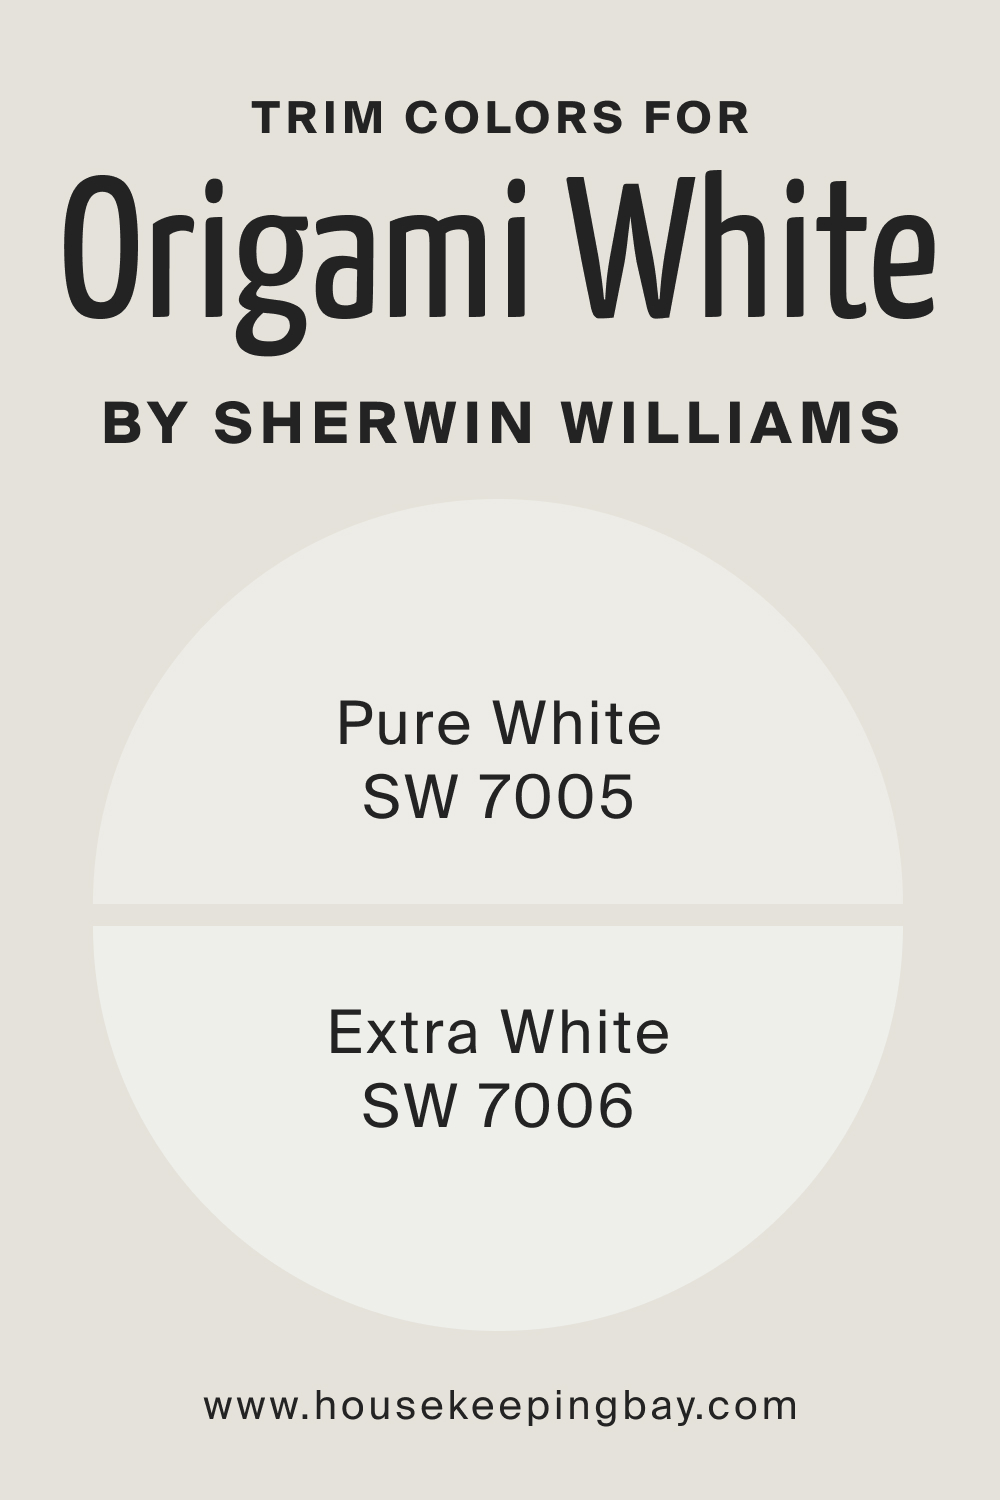 Trim Color for Origami White SW 7636 by Sherwin Williams